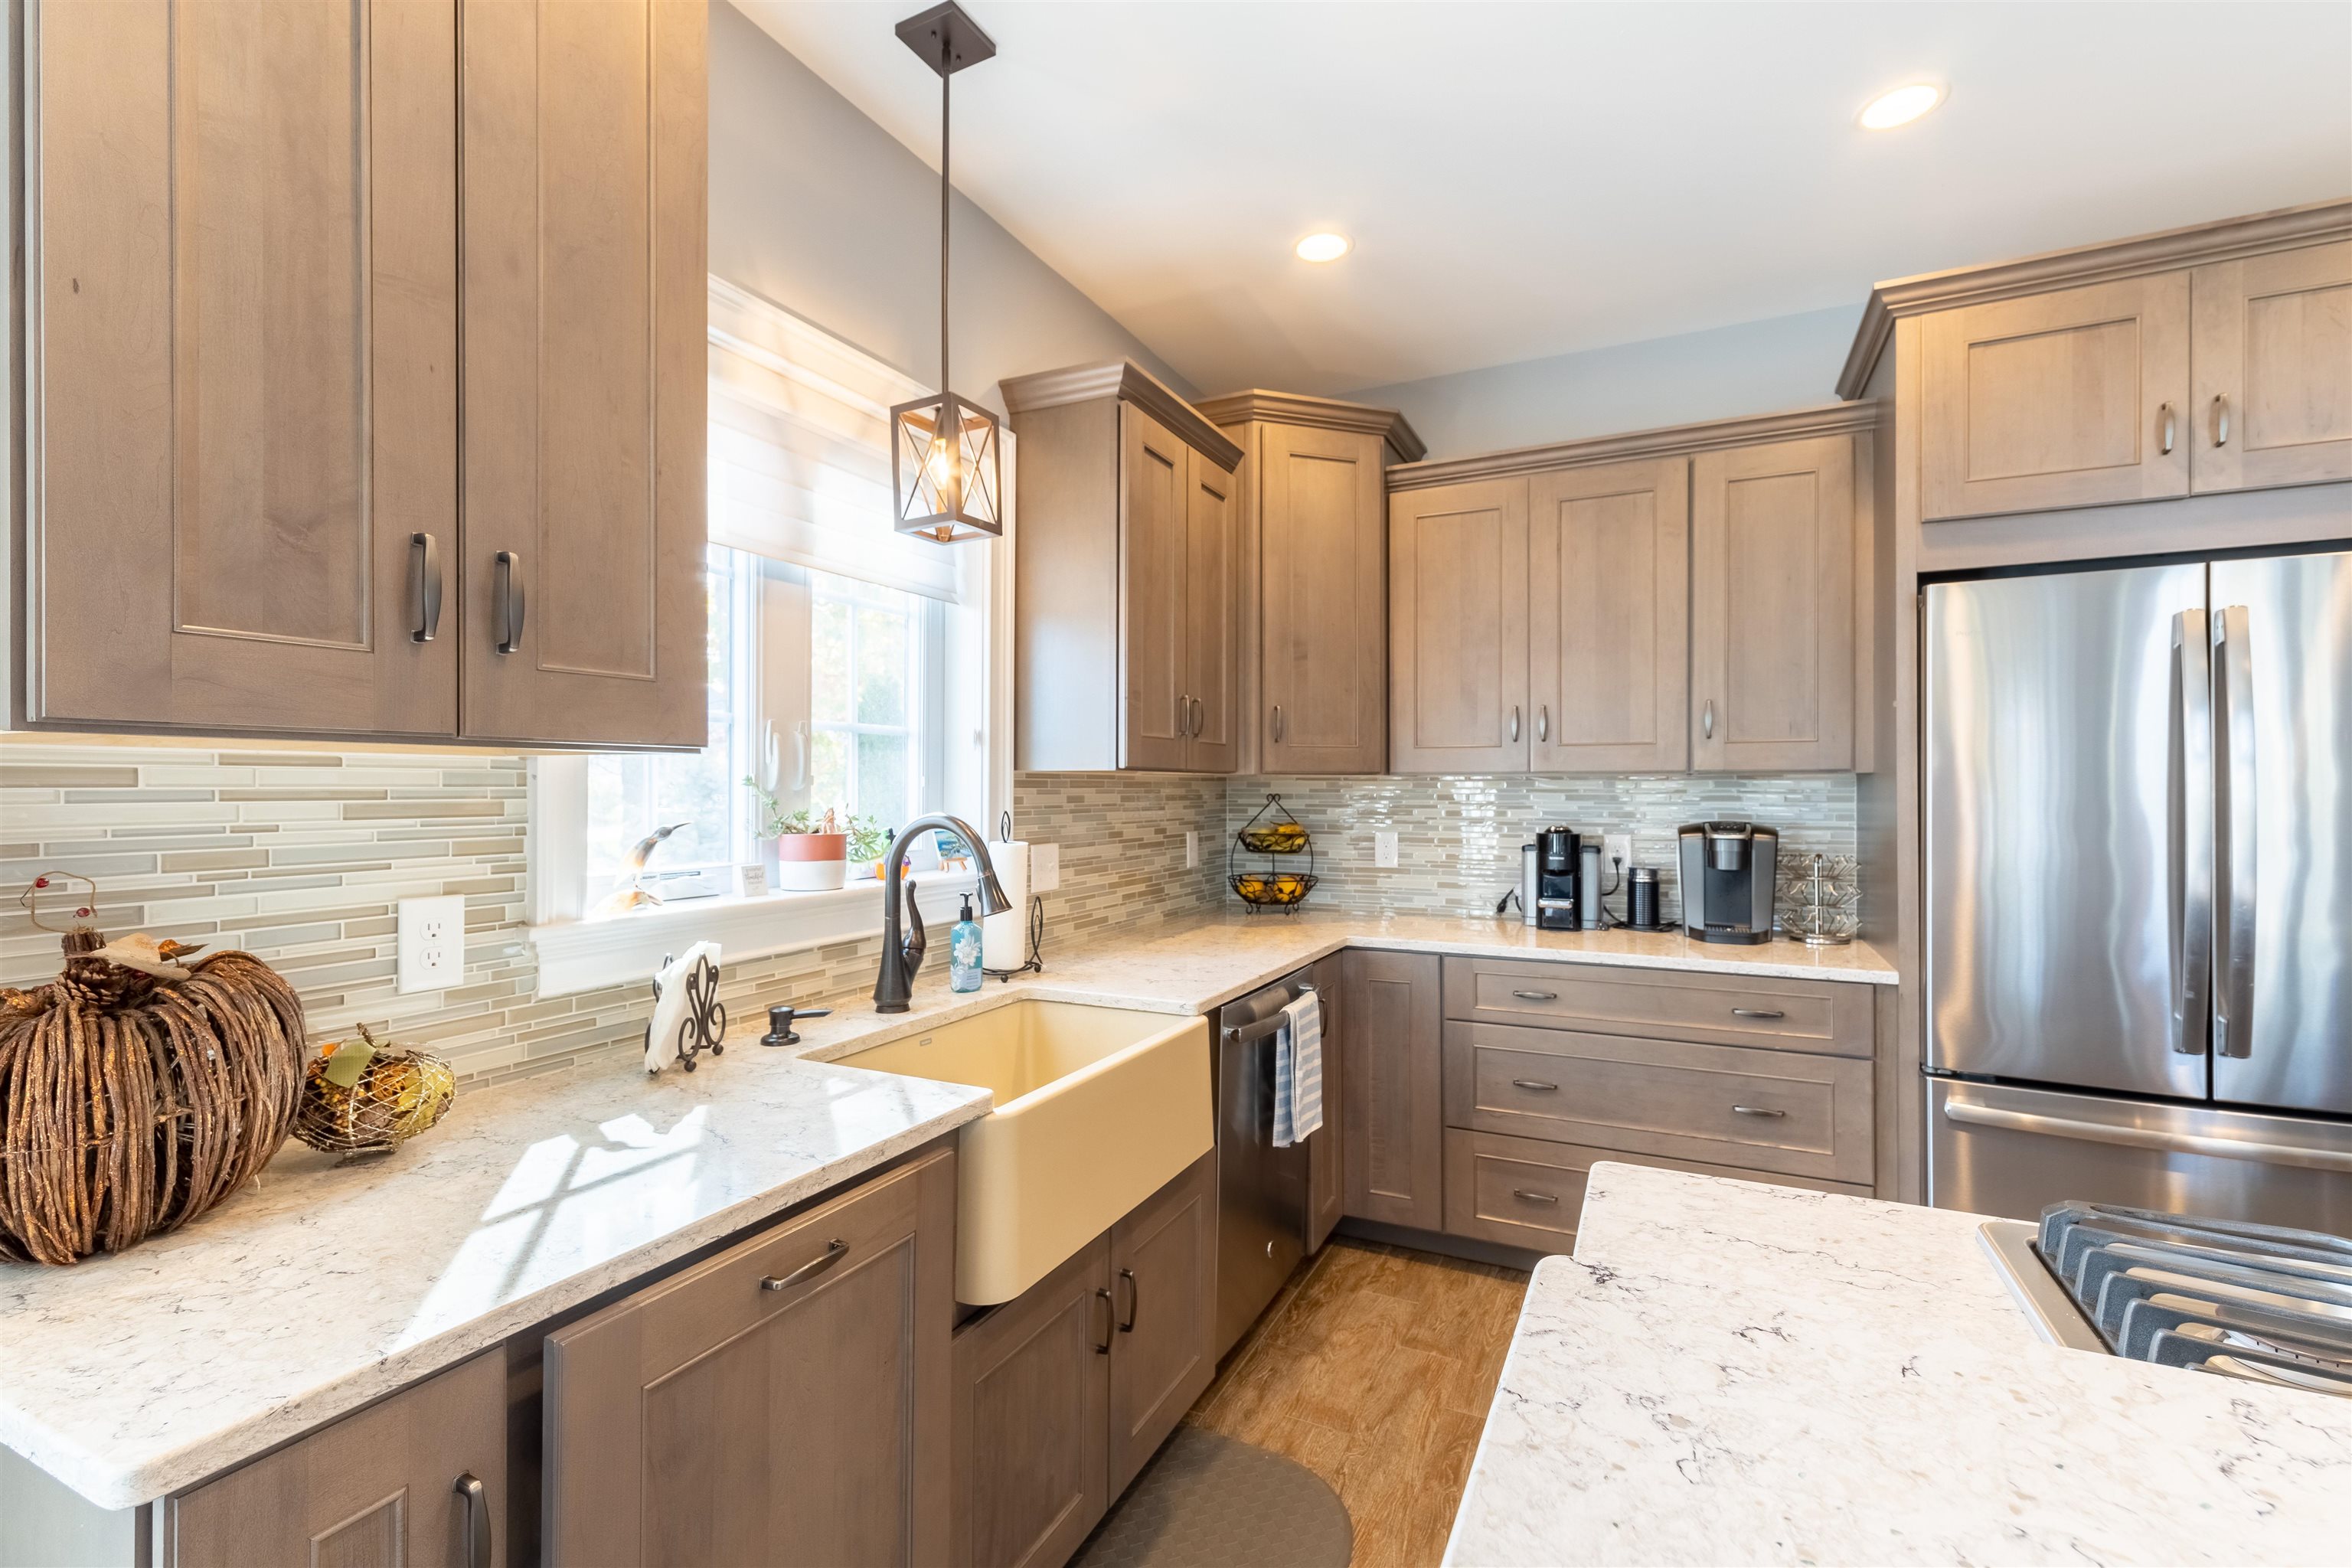 Well appointed kitchen is sure to please the novice to most talent cooks.  Double wall oven, cook top gas range to the stylish farmers sink and Quartz countertops. Come discover this amazing kitchen with adjacent dining area.  The true heart of the home.